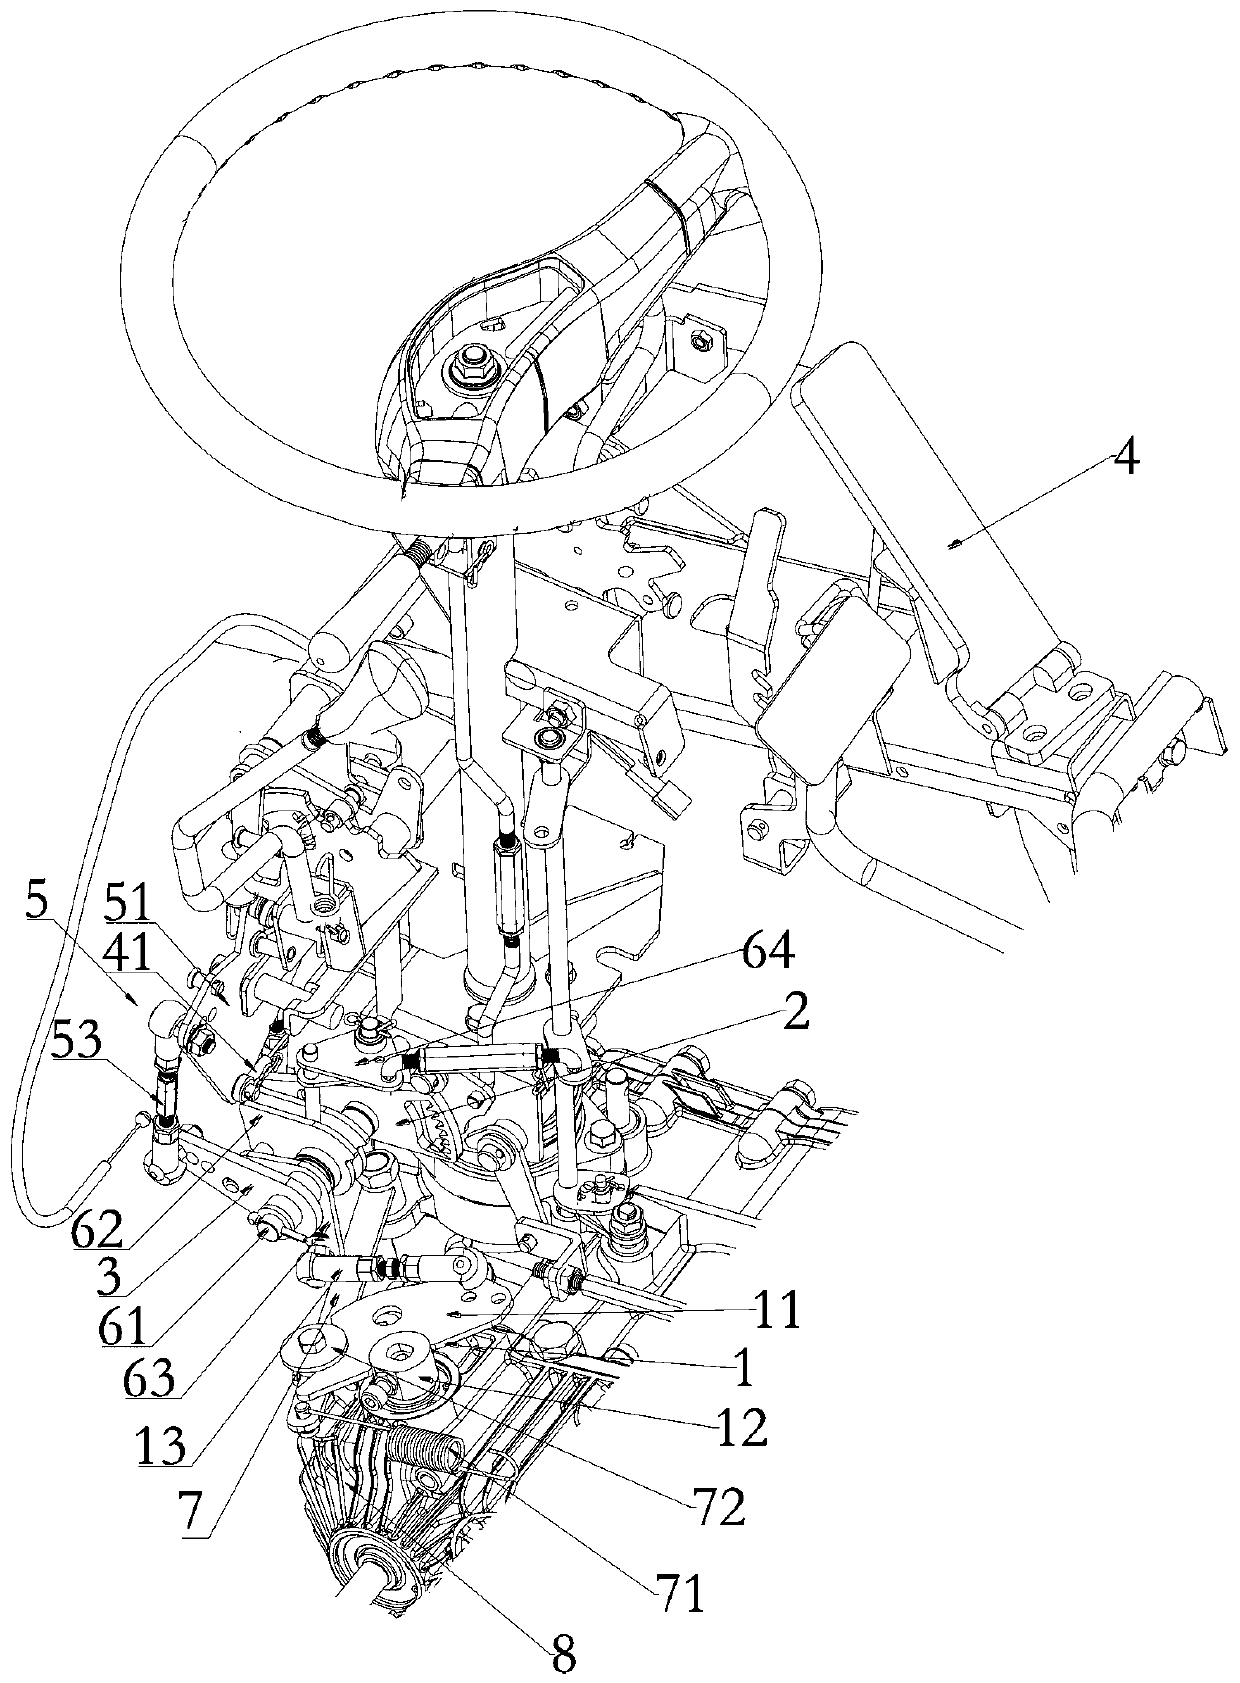 A hst control mechanism and agricultural machinery